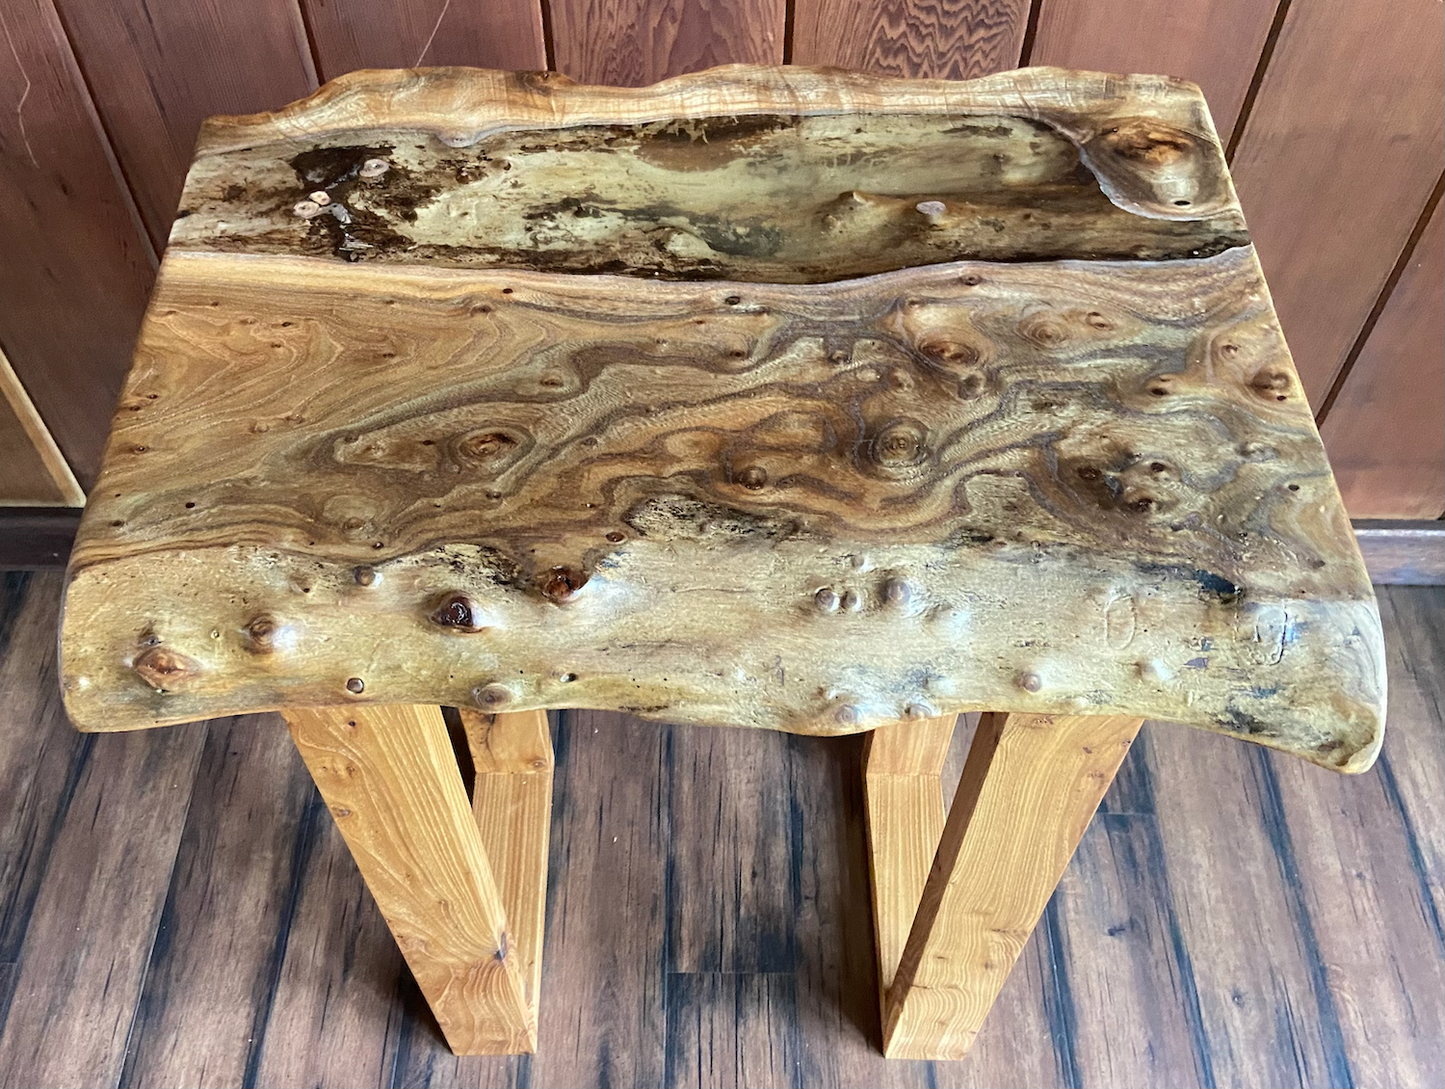 Live Edge Chestnut Burl Display Table with Clear Epoxy